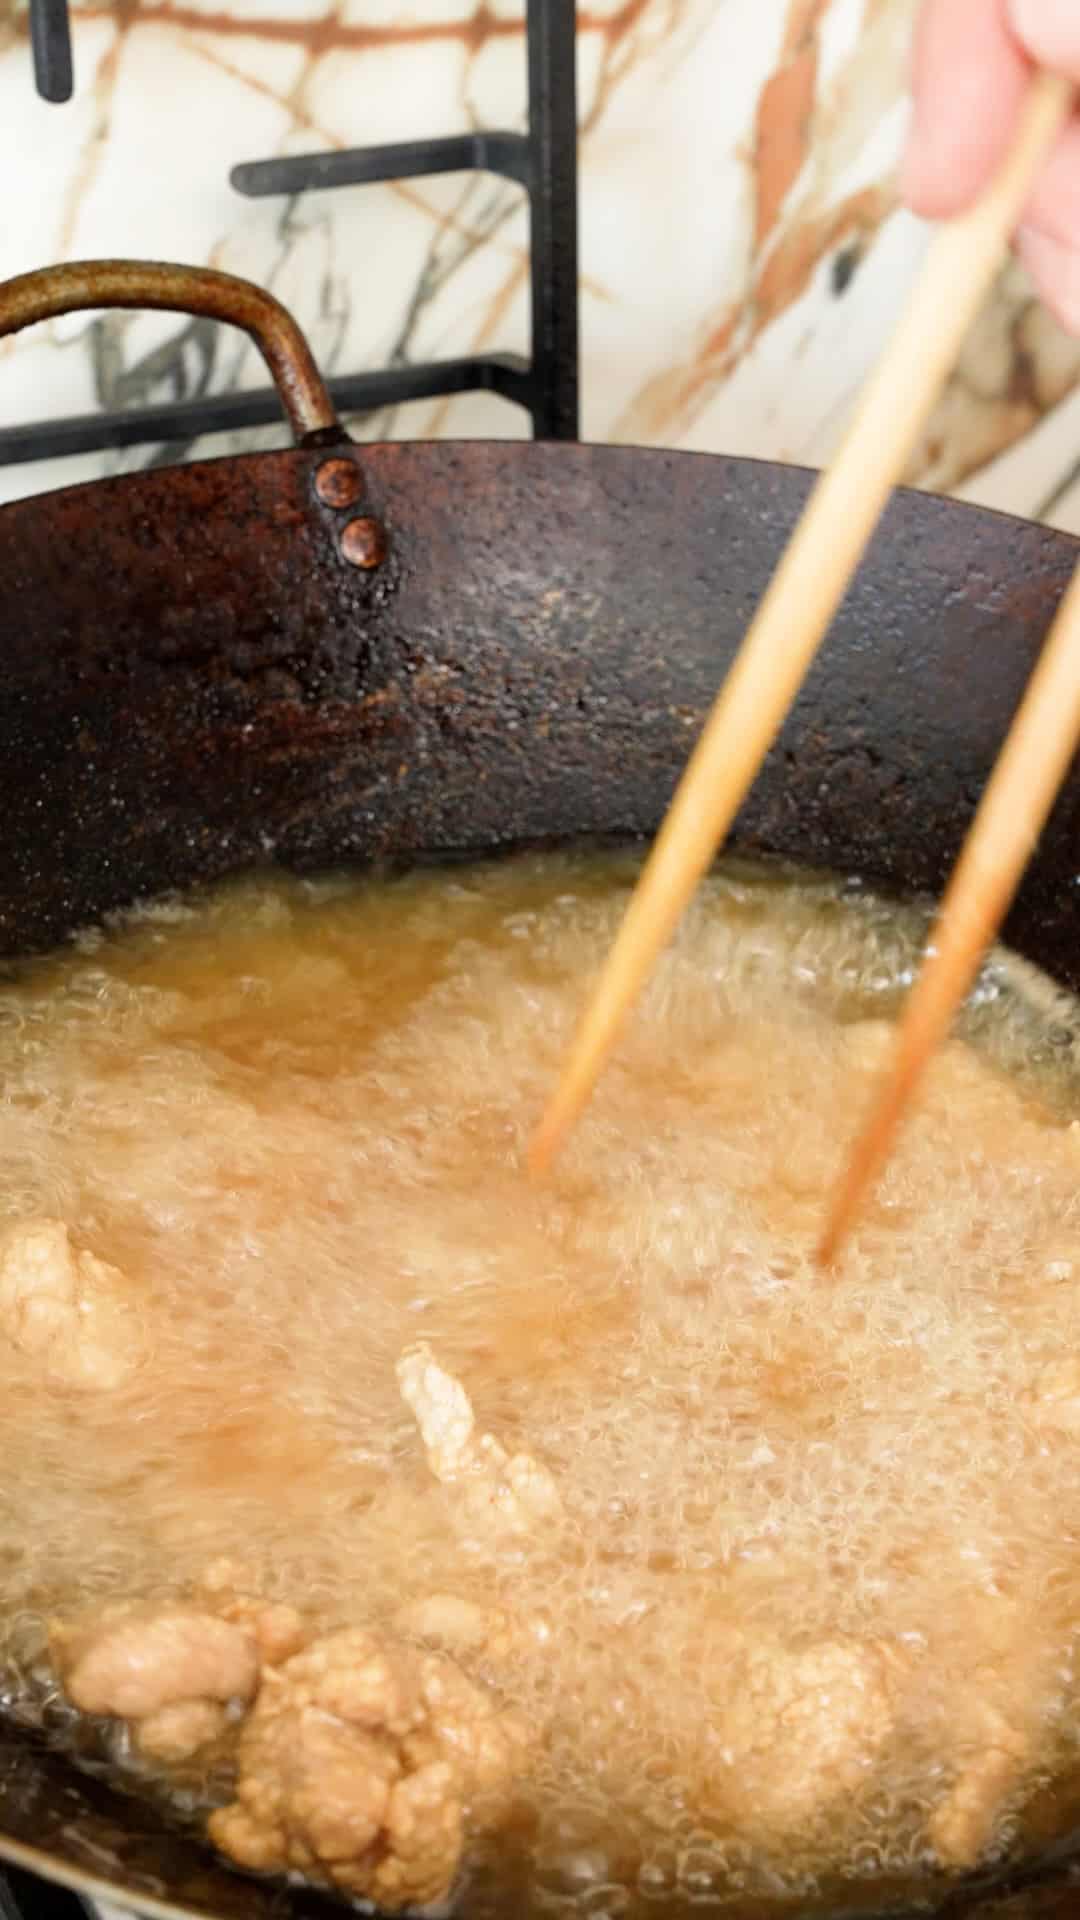 Chicken pieces frying in hot oil in a wok.